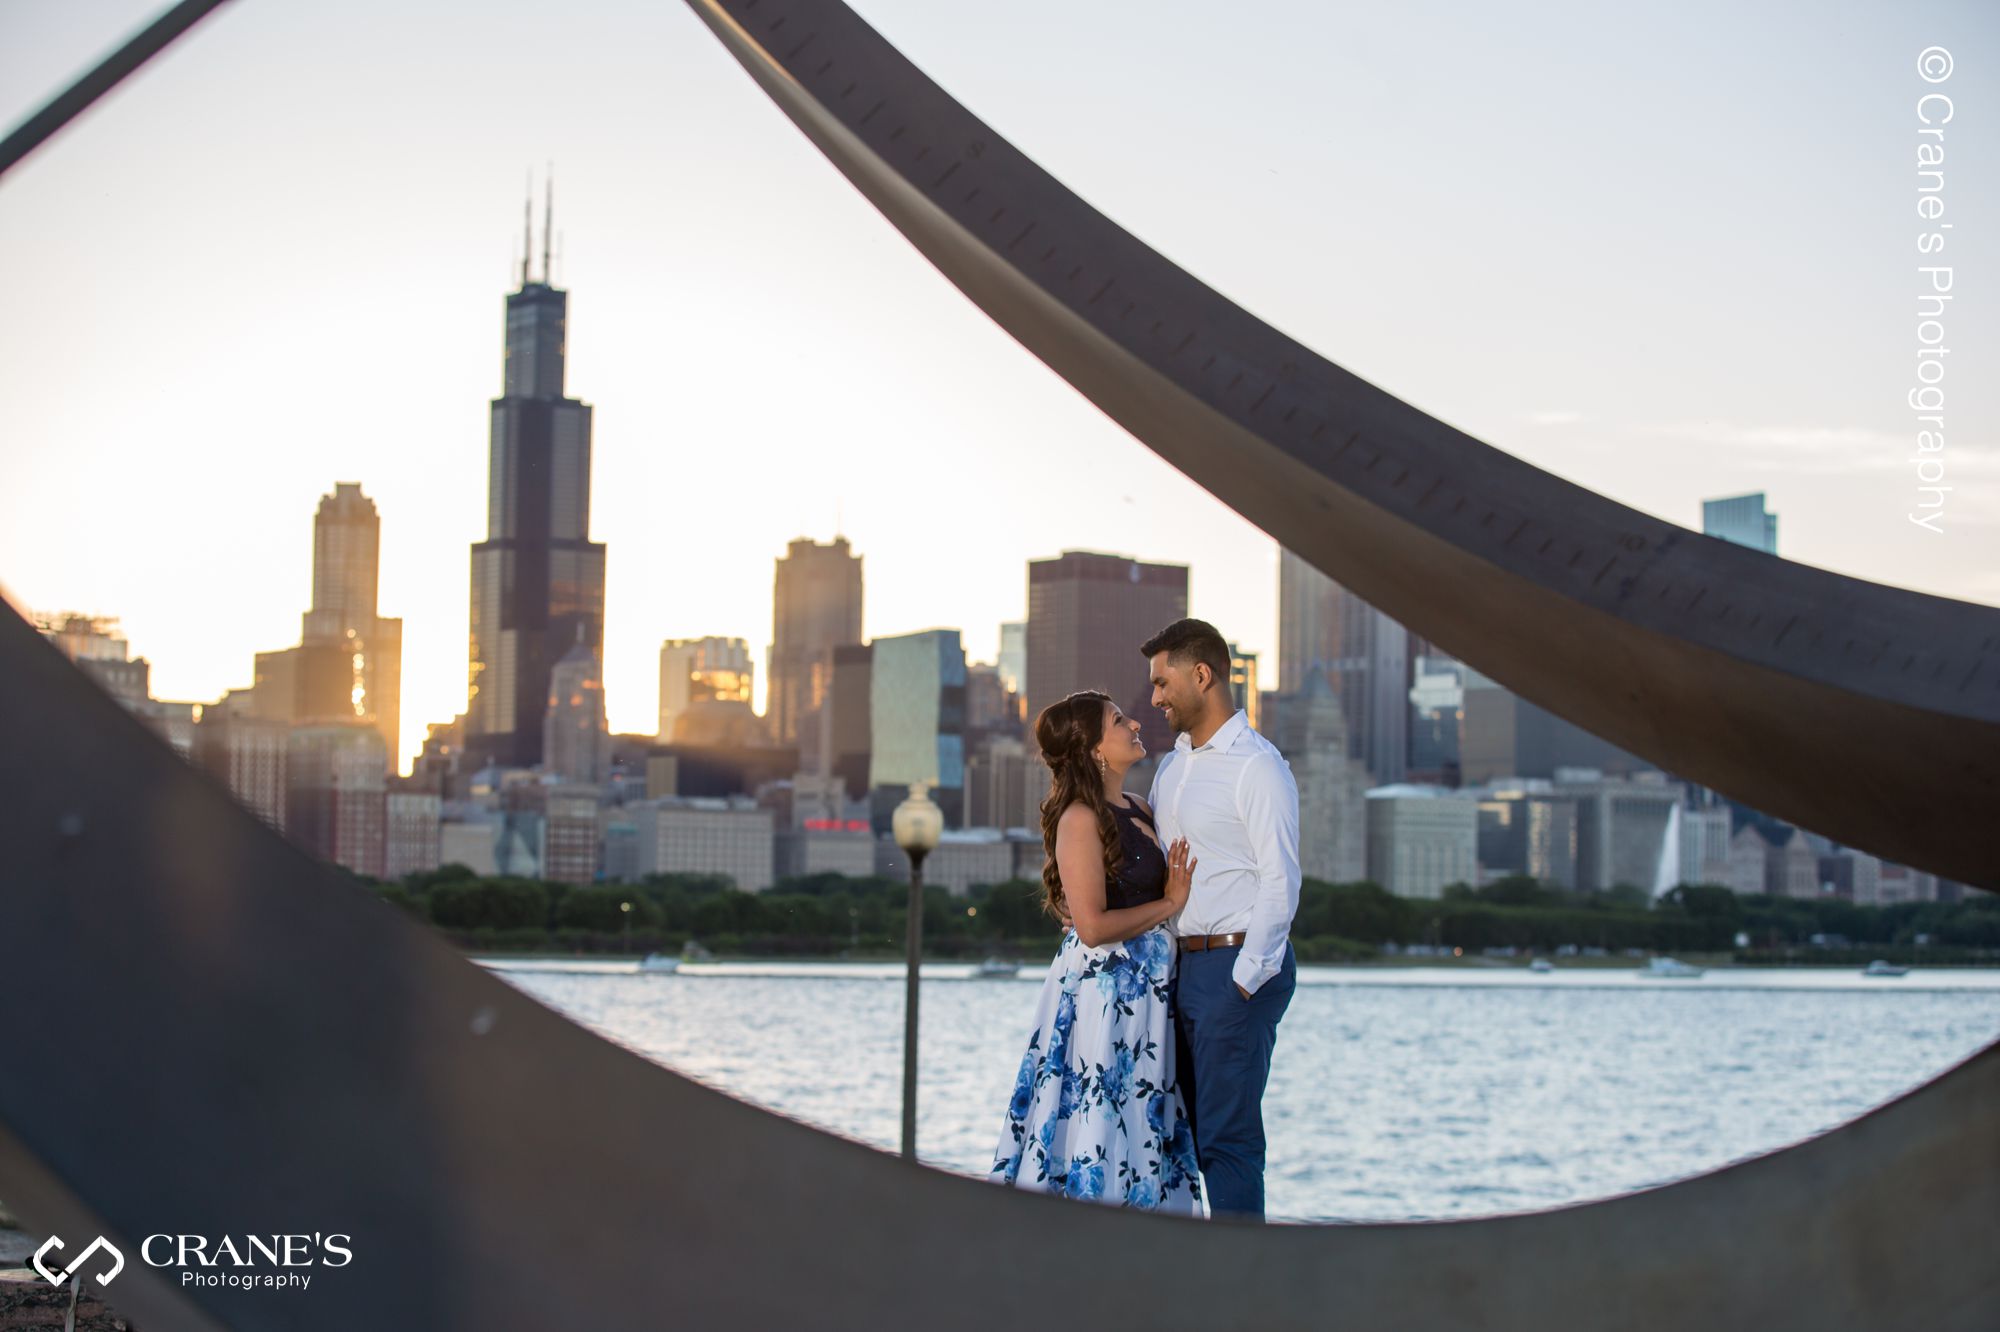 A couple posing for a photo near the Adler Planetarium with a dramatic downtown Chicago view in the background